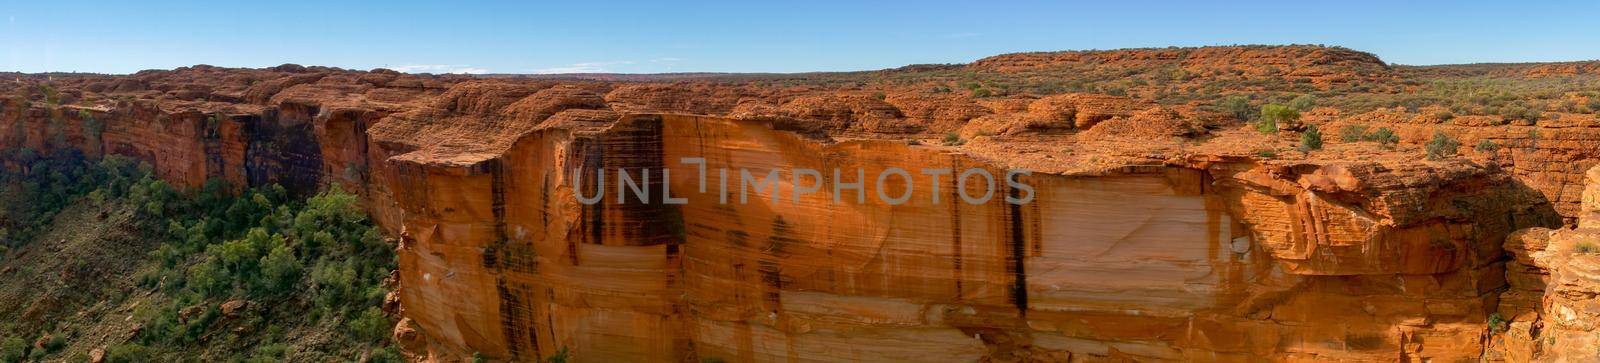 view of the a Canyons wall, Watarrka National Park, Northern Territory